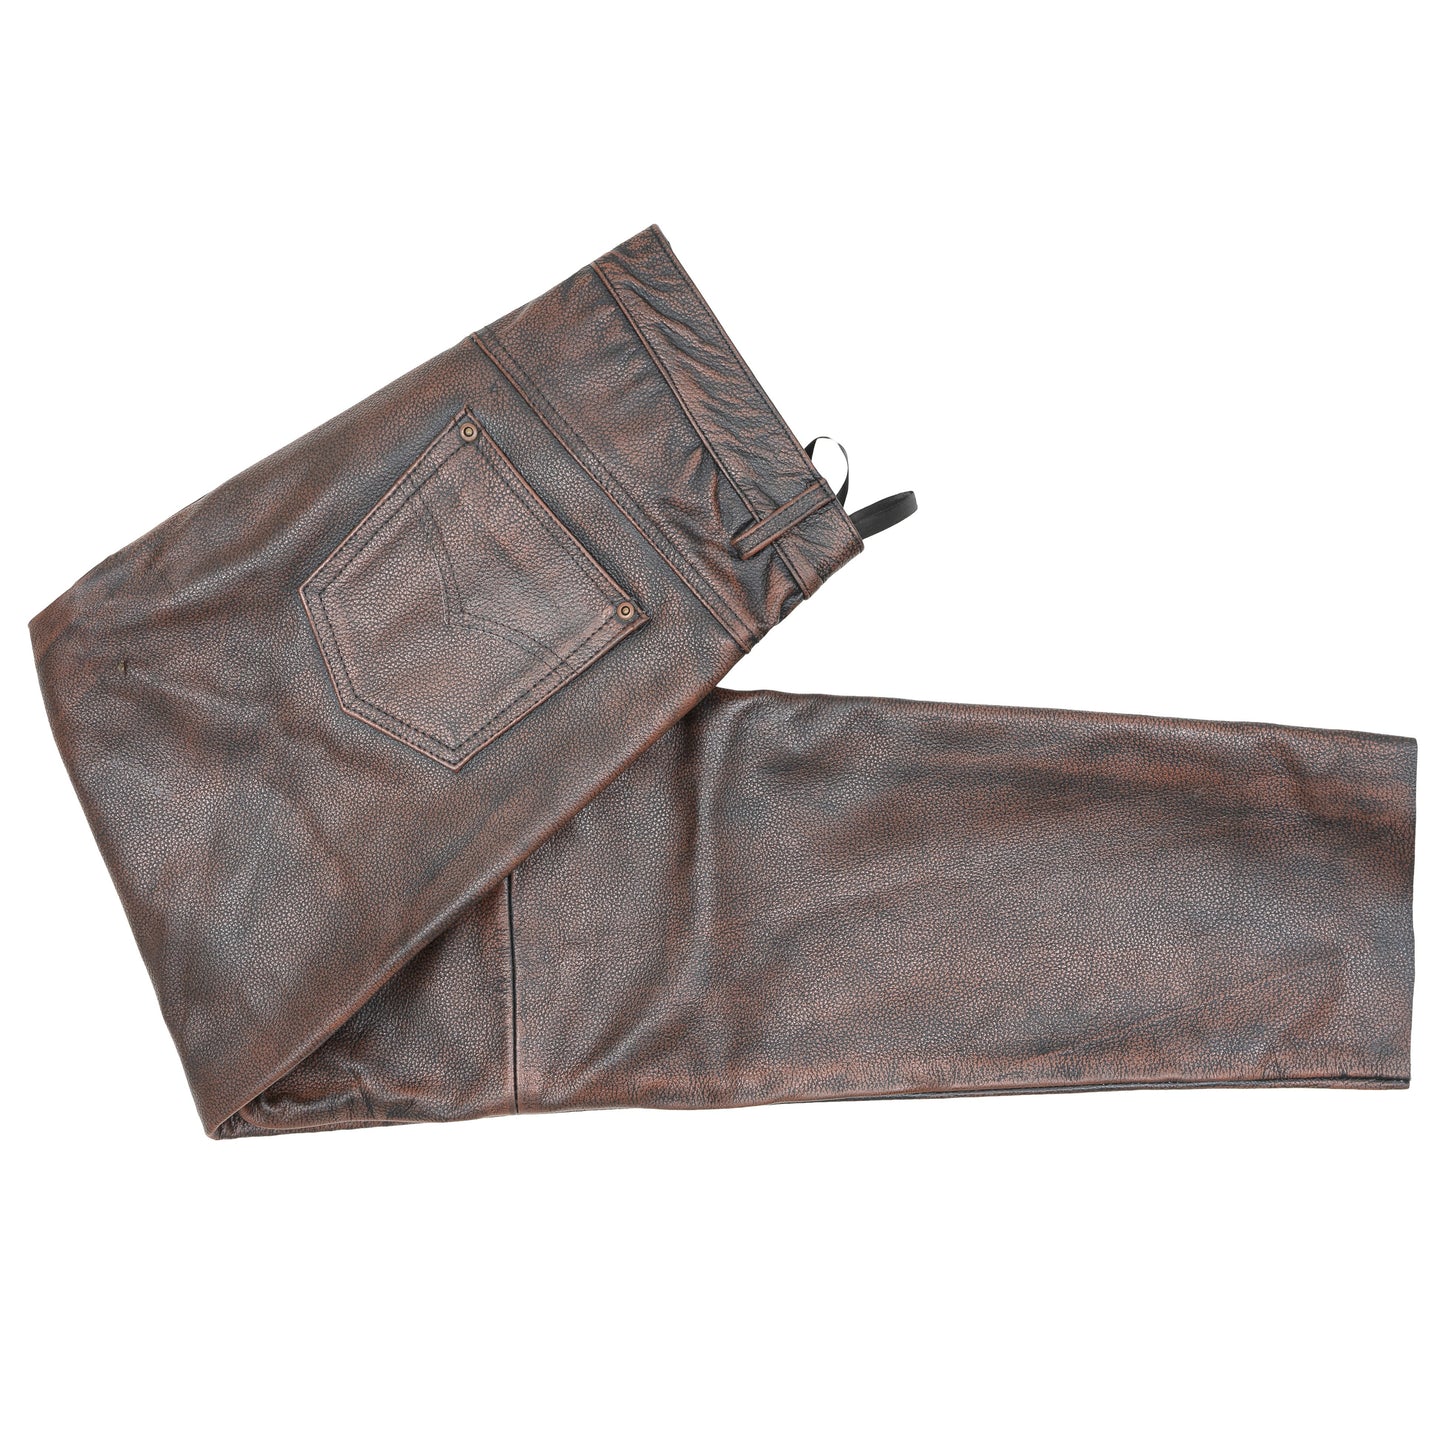 ZAWIAR Men's Brown Distressed Leather Classic Motorcycle Trousers Pants for Bikers